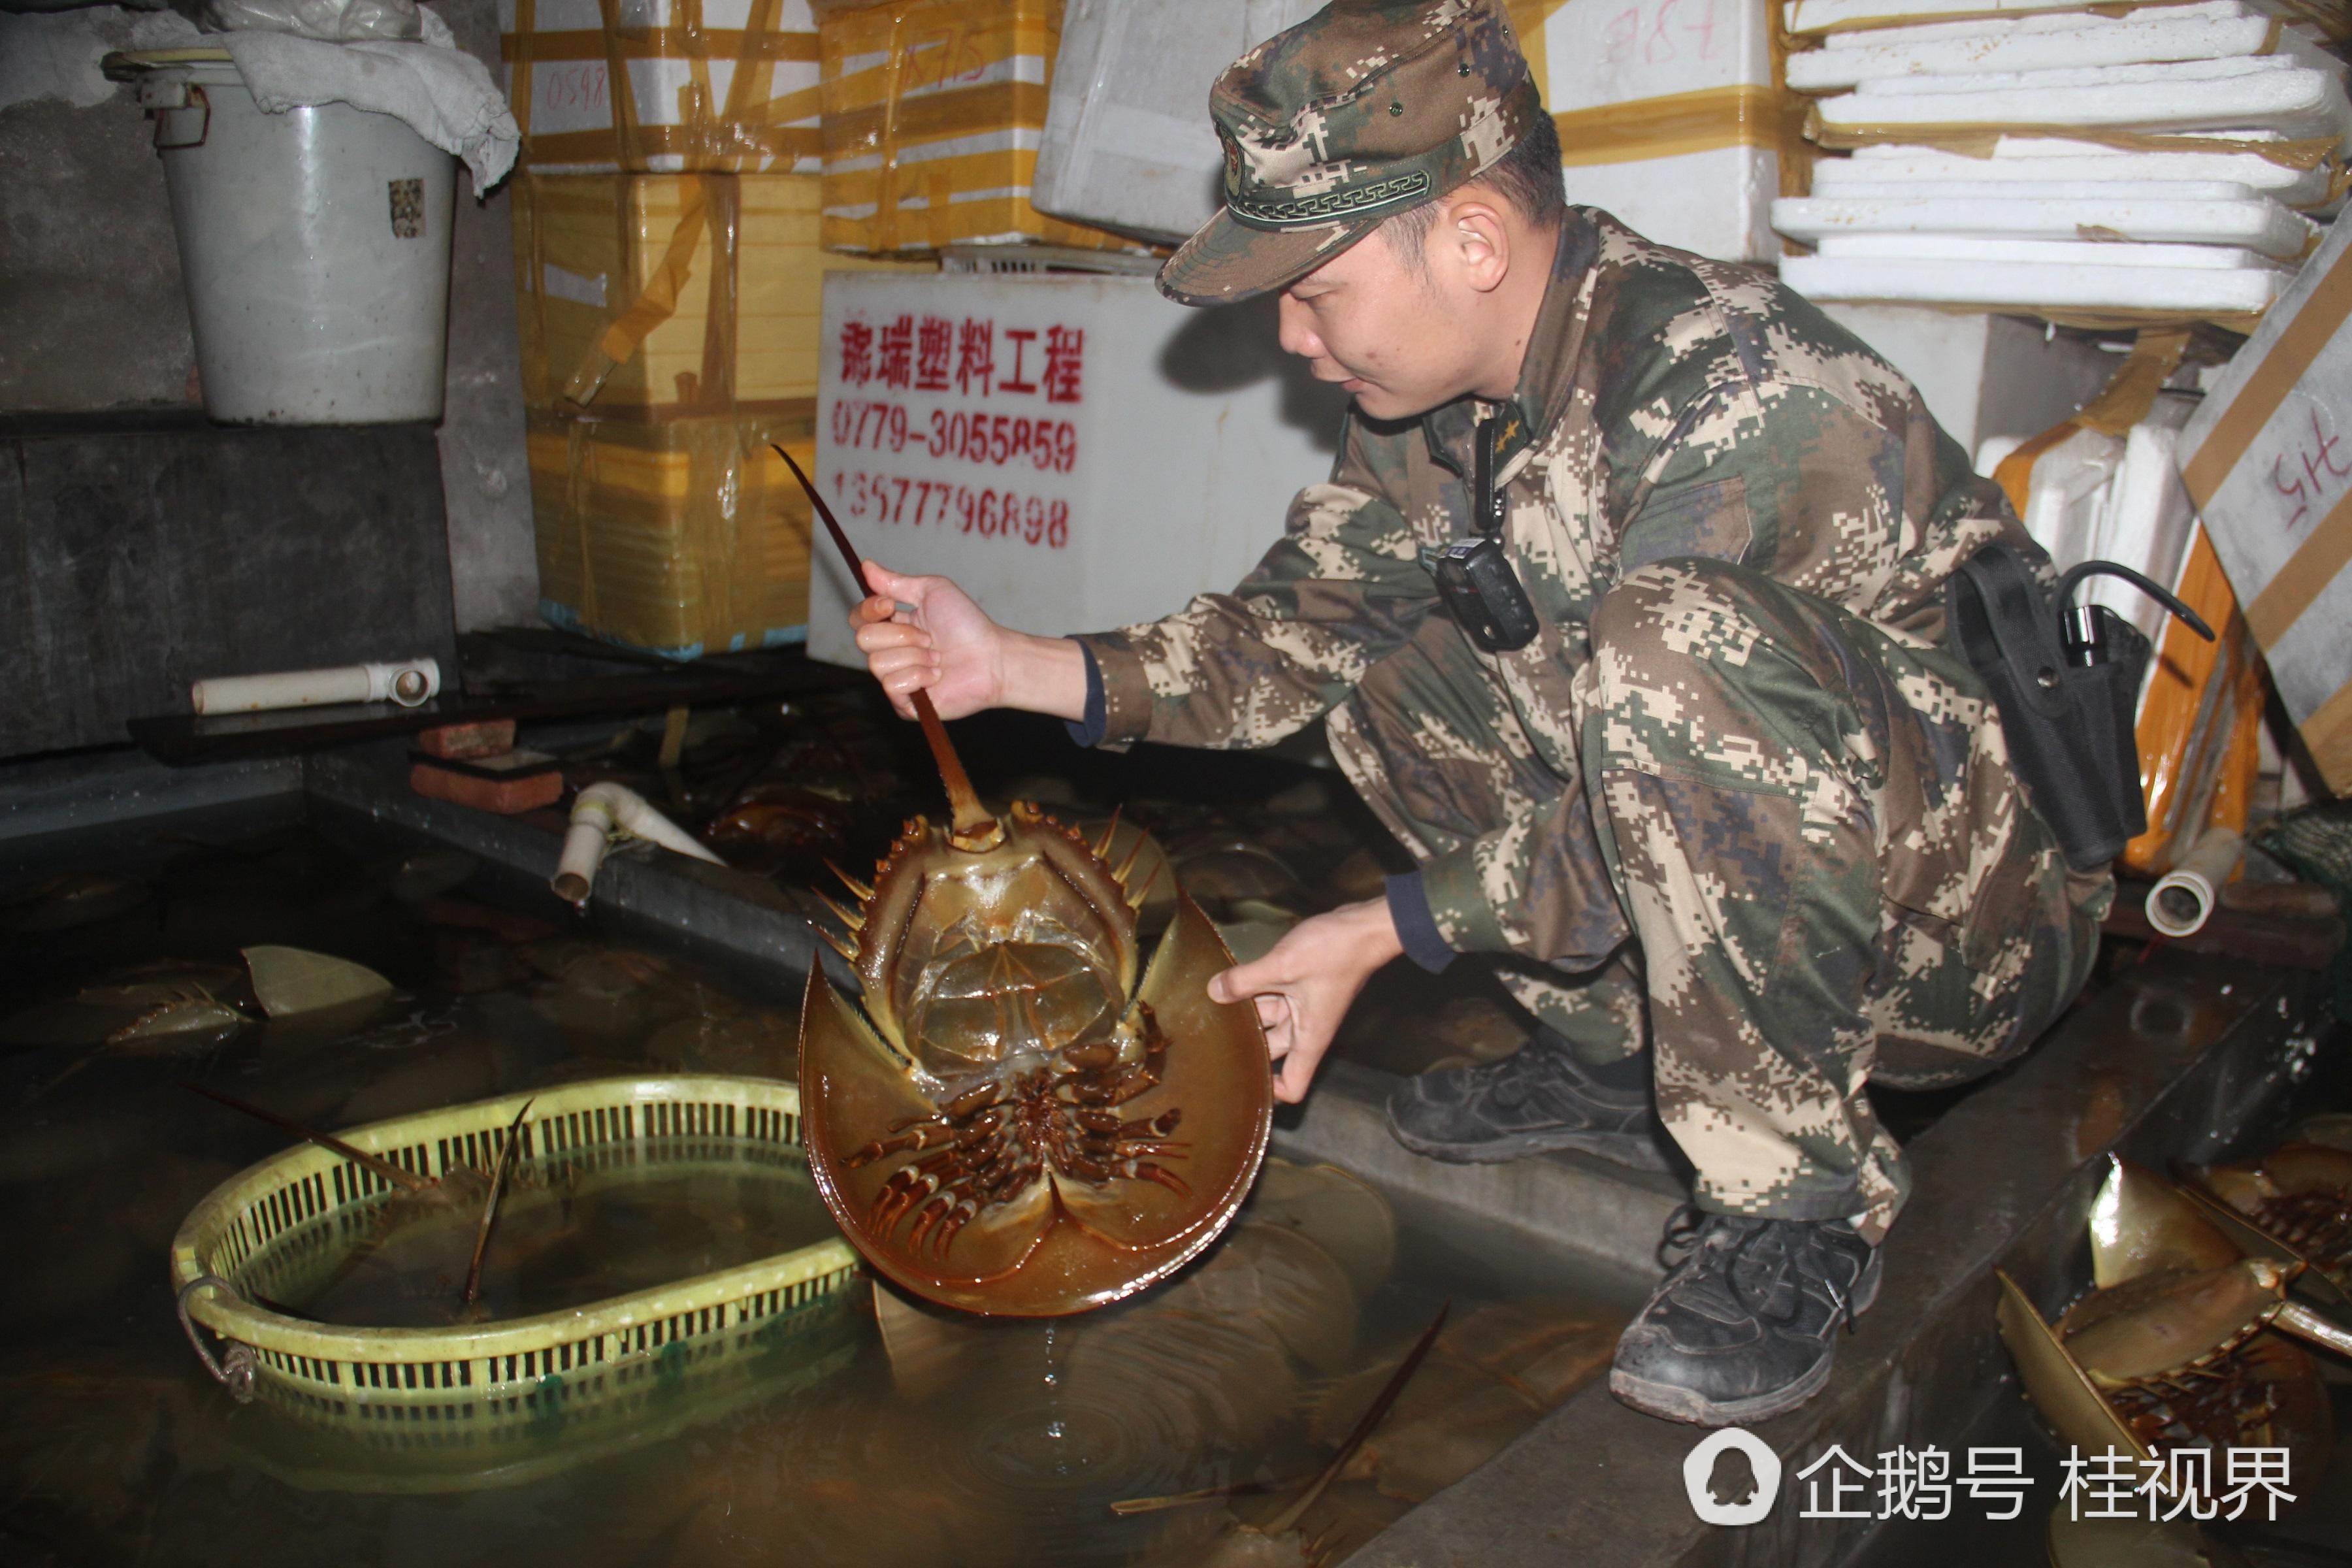 The crabs were seized from a shop in Beihai, Guangxi. Photo: Qq.com